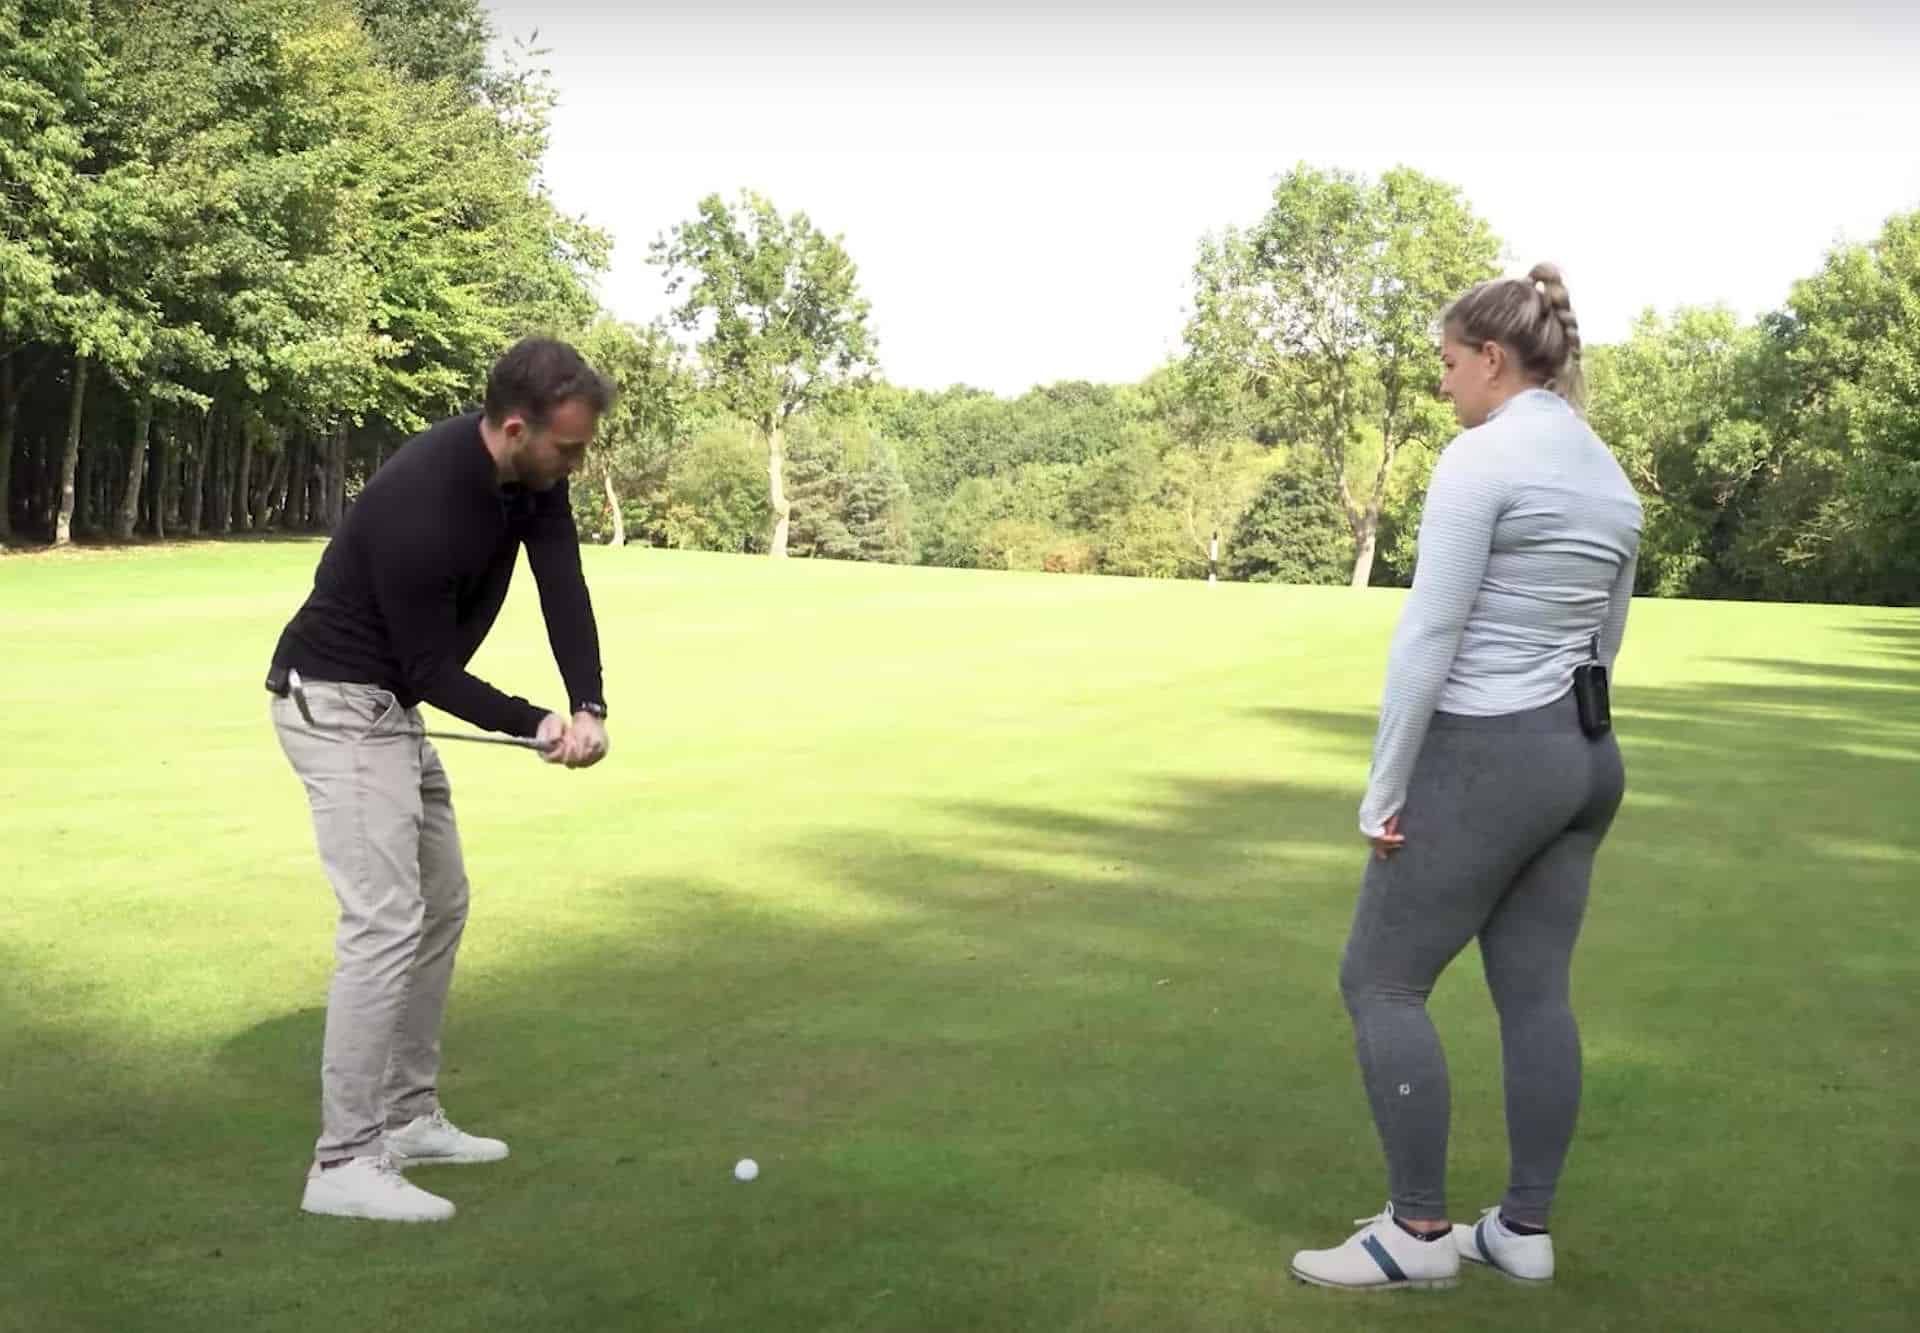 How to shallow the golf club